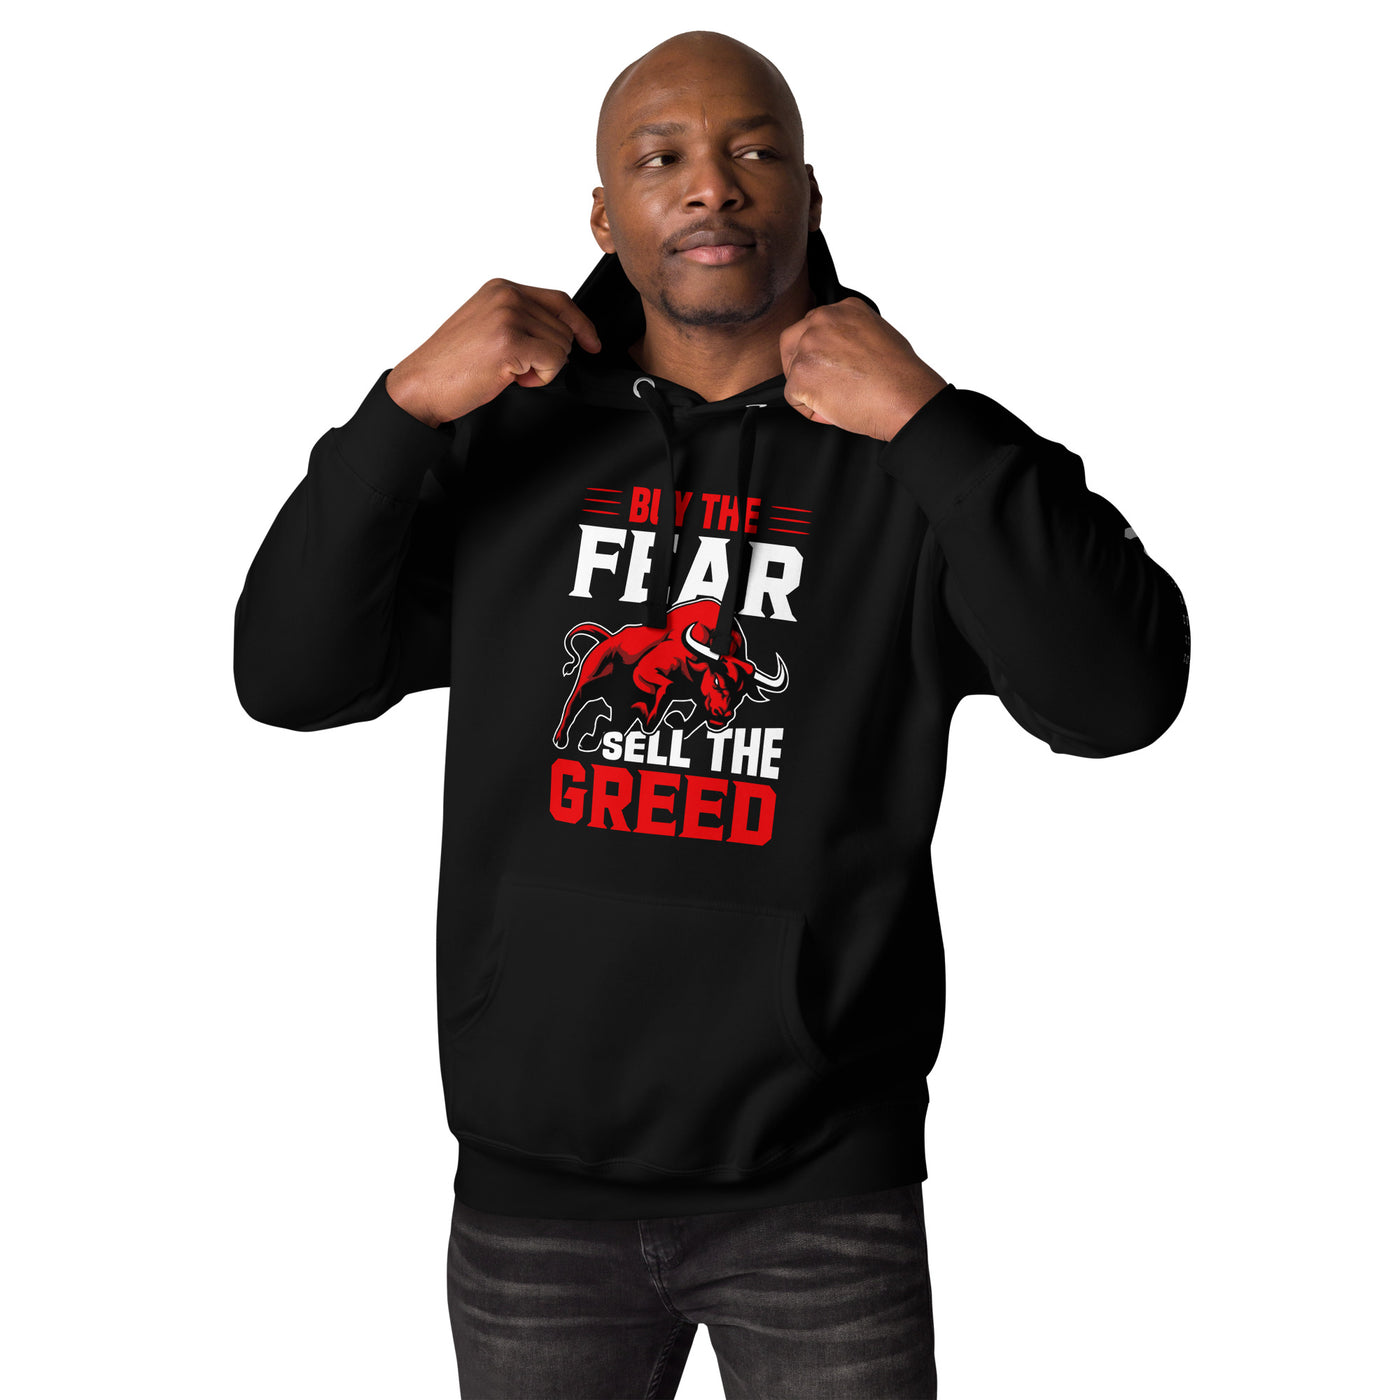 Buy the Fear; Sell the Greed V1 - Unisex Hoodie